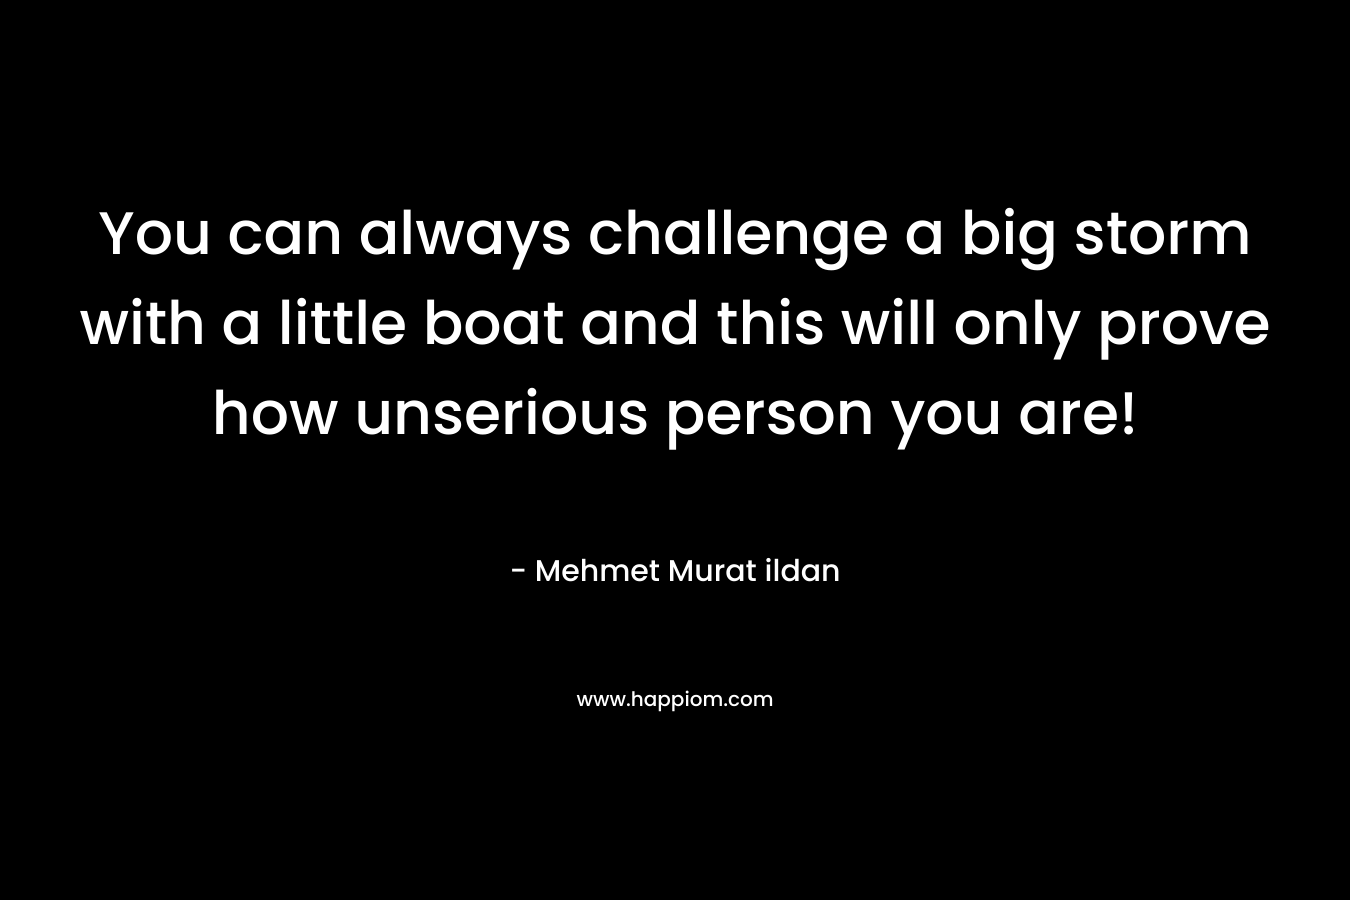 You can always challenge a big storm with a little boat and this will only prove how unserious person you are!